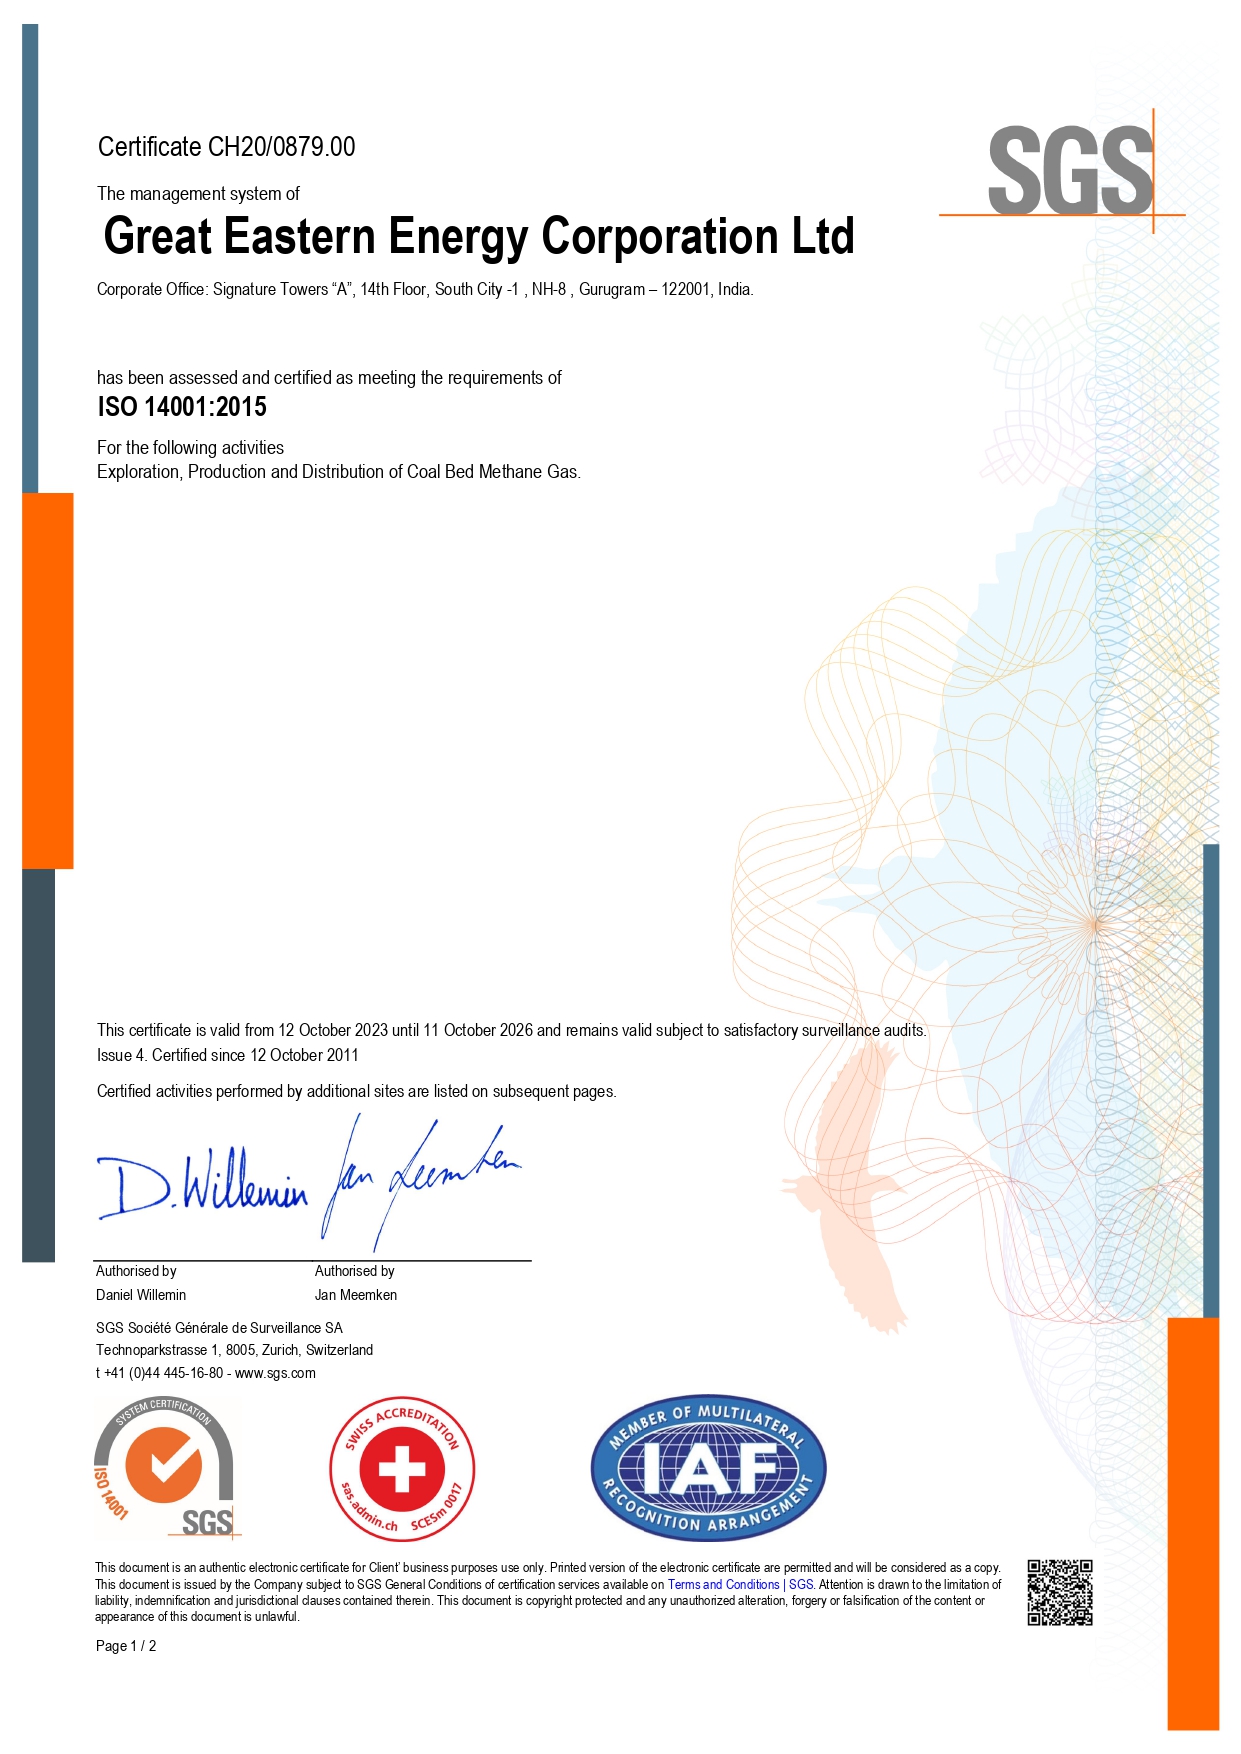 GEECL ISO 14001:2004 Certificate